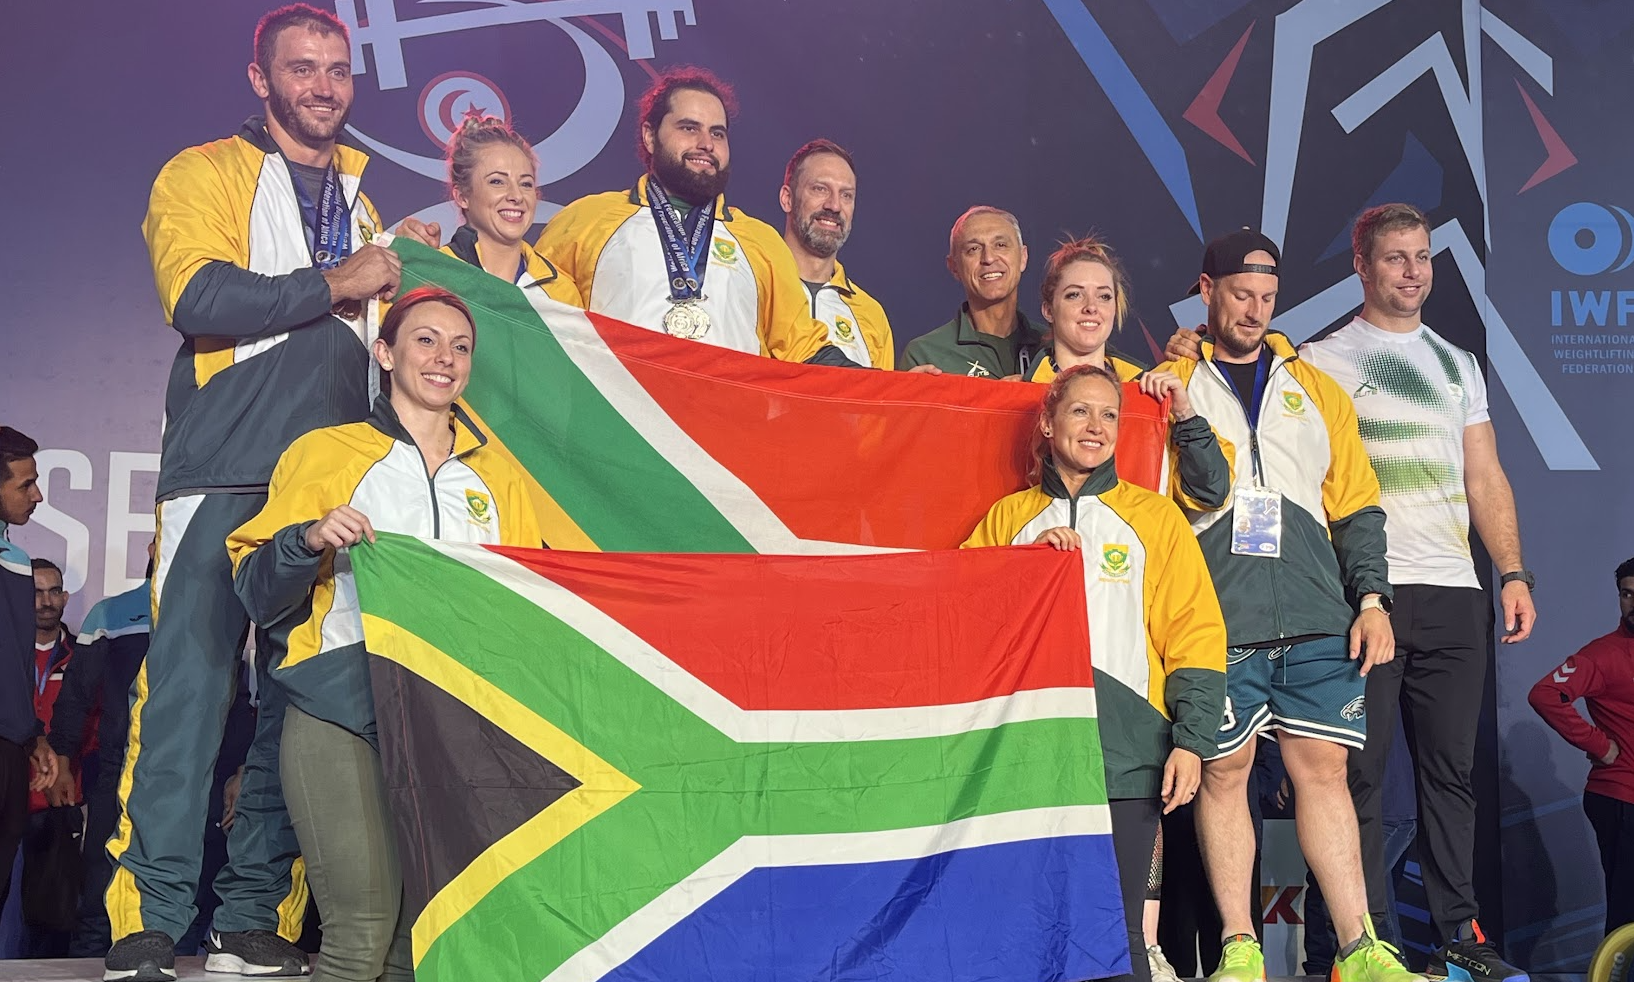 South Africa's team that travelled to Tunisia for the African Championships was self-funded, with some athletes having taken out a loan to fund the trip ©ITG